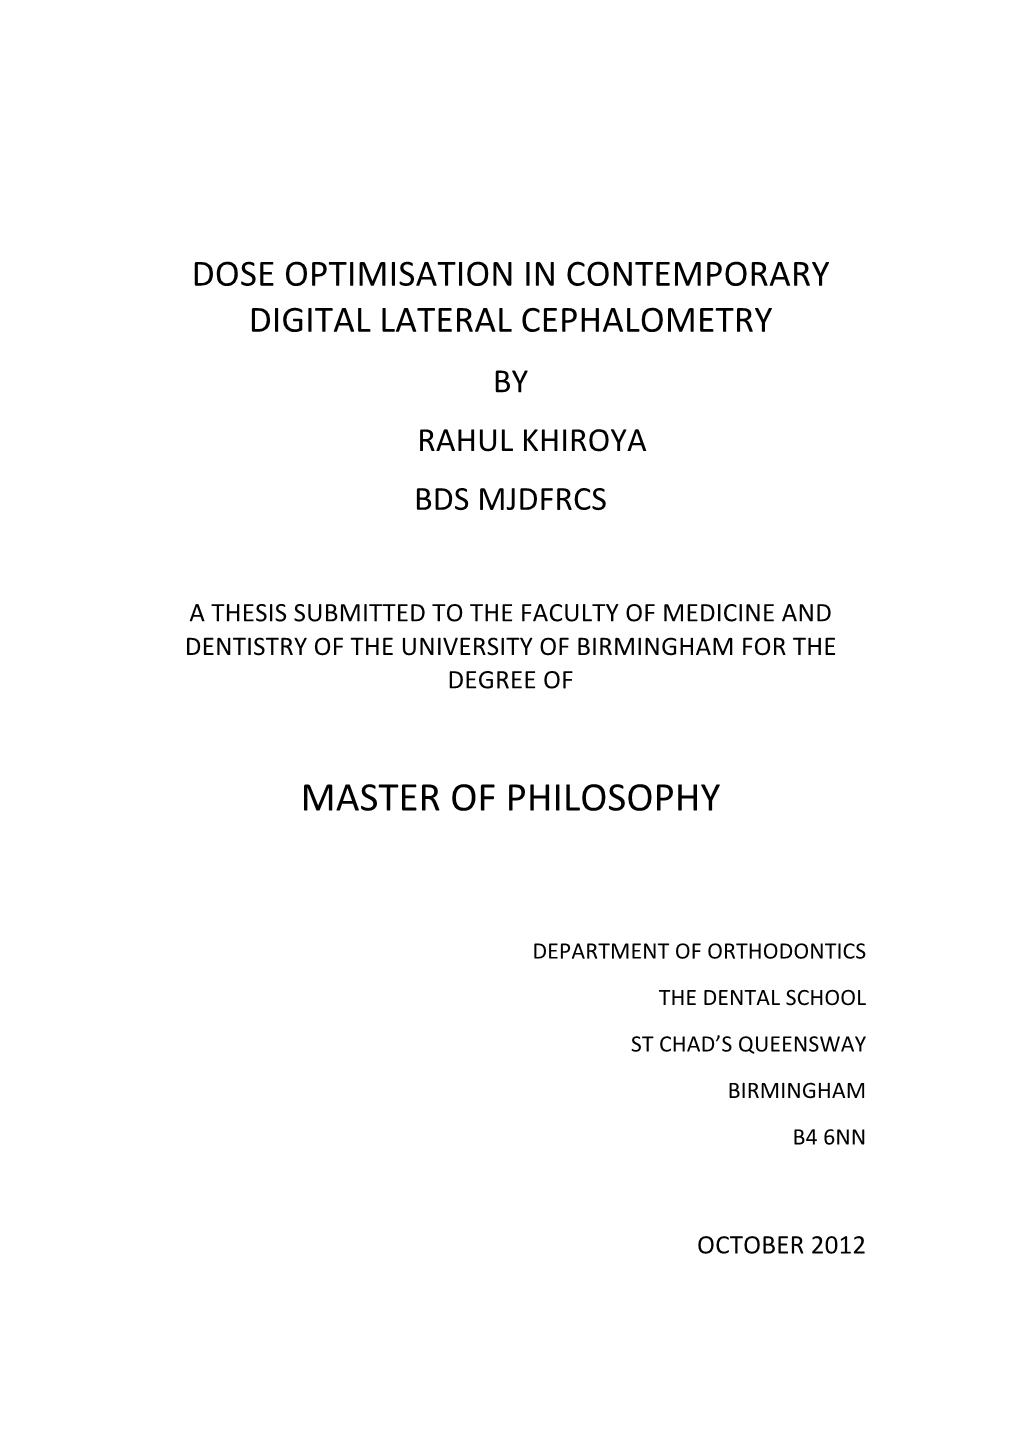 Dose Optimisation in Contemporary Digital Lateral Cephalometry by Rahul Khiroya Bds Mjdfrcs